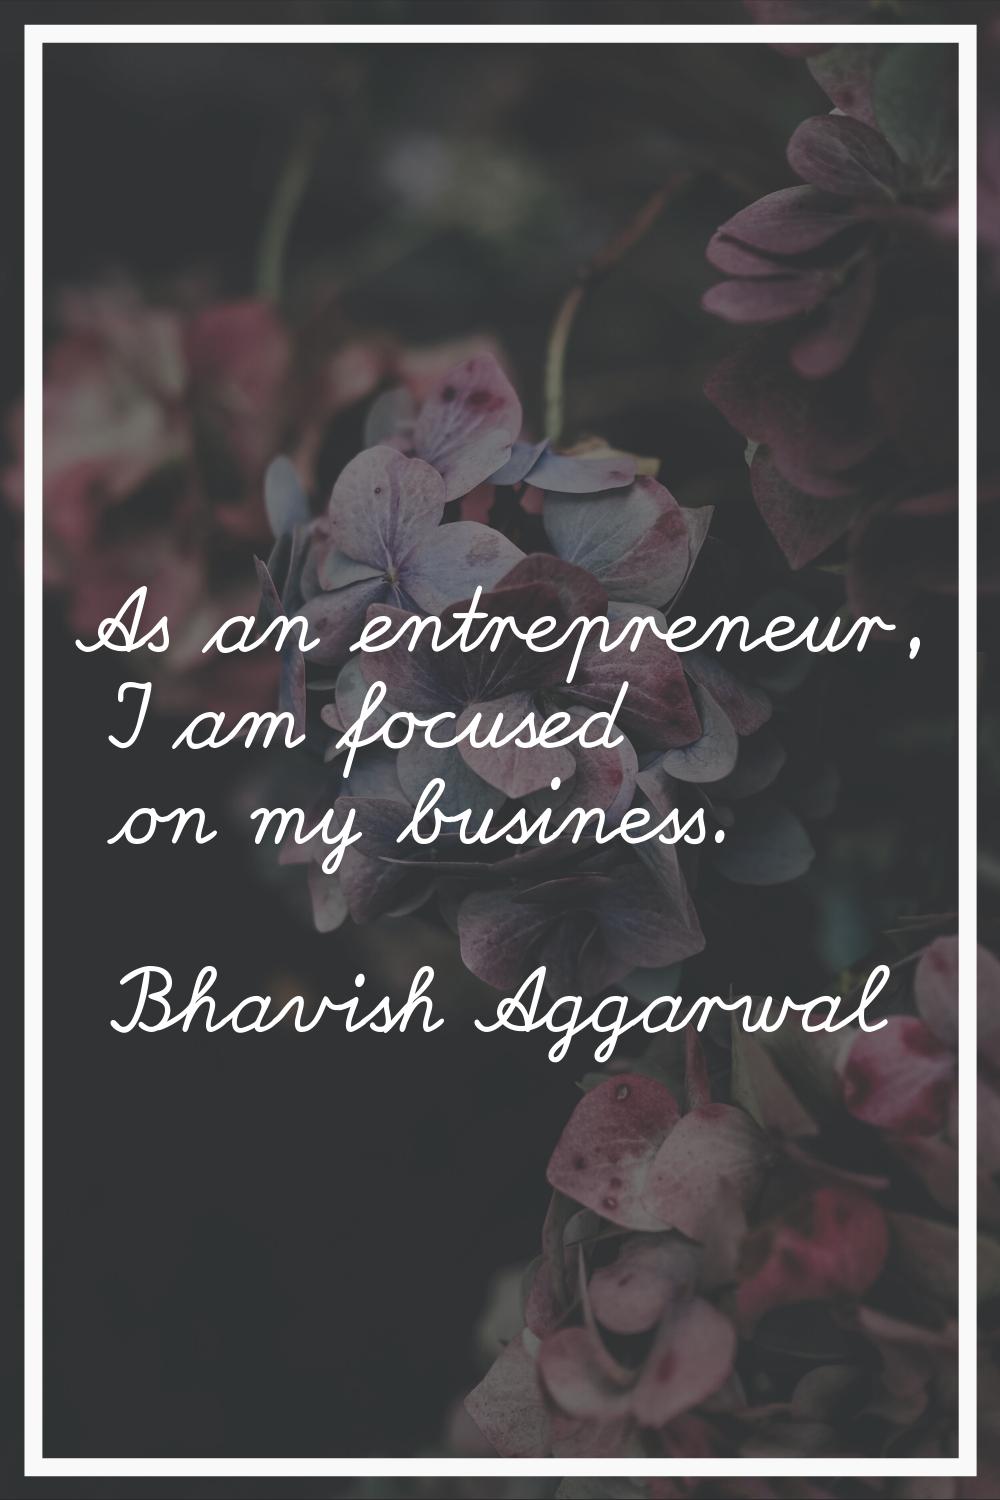 As an entrepreneur, I am focused on my business.